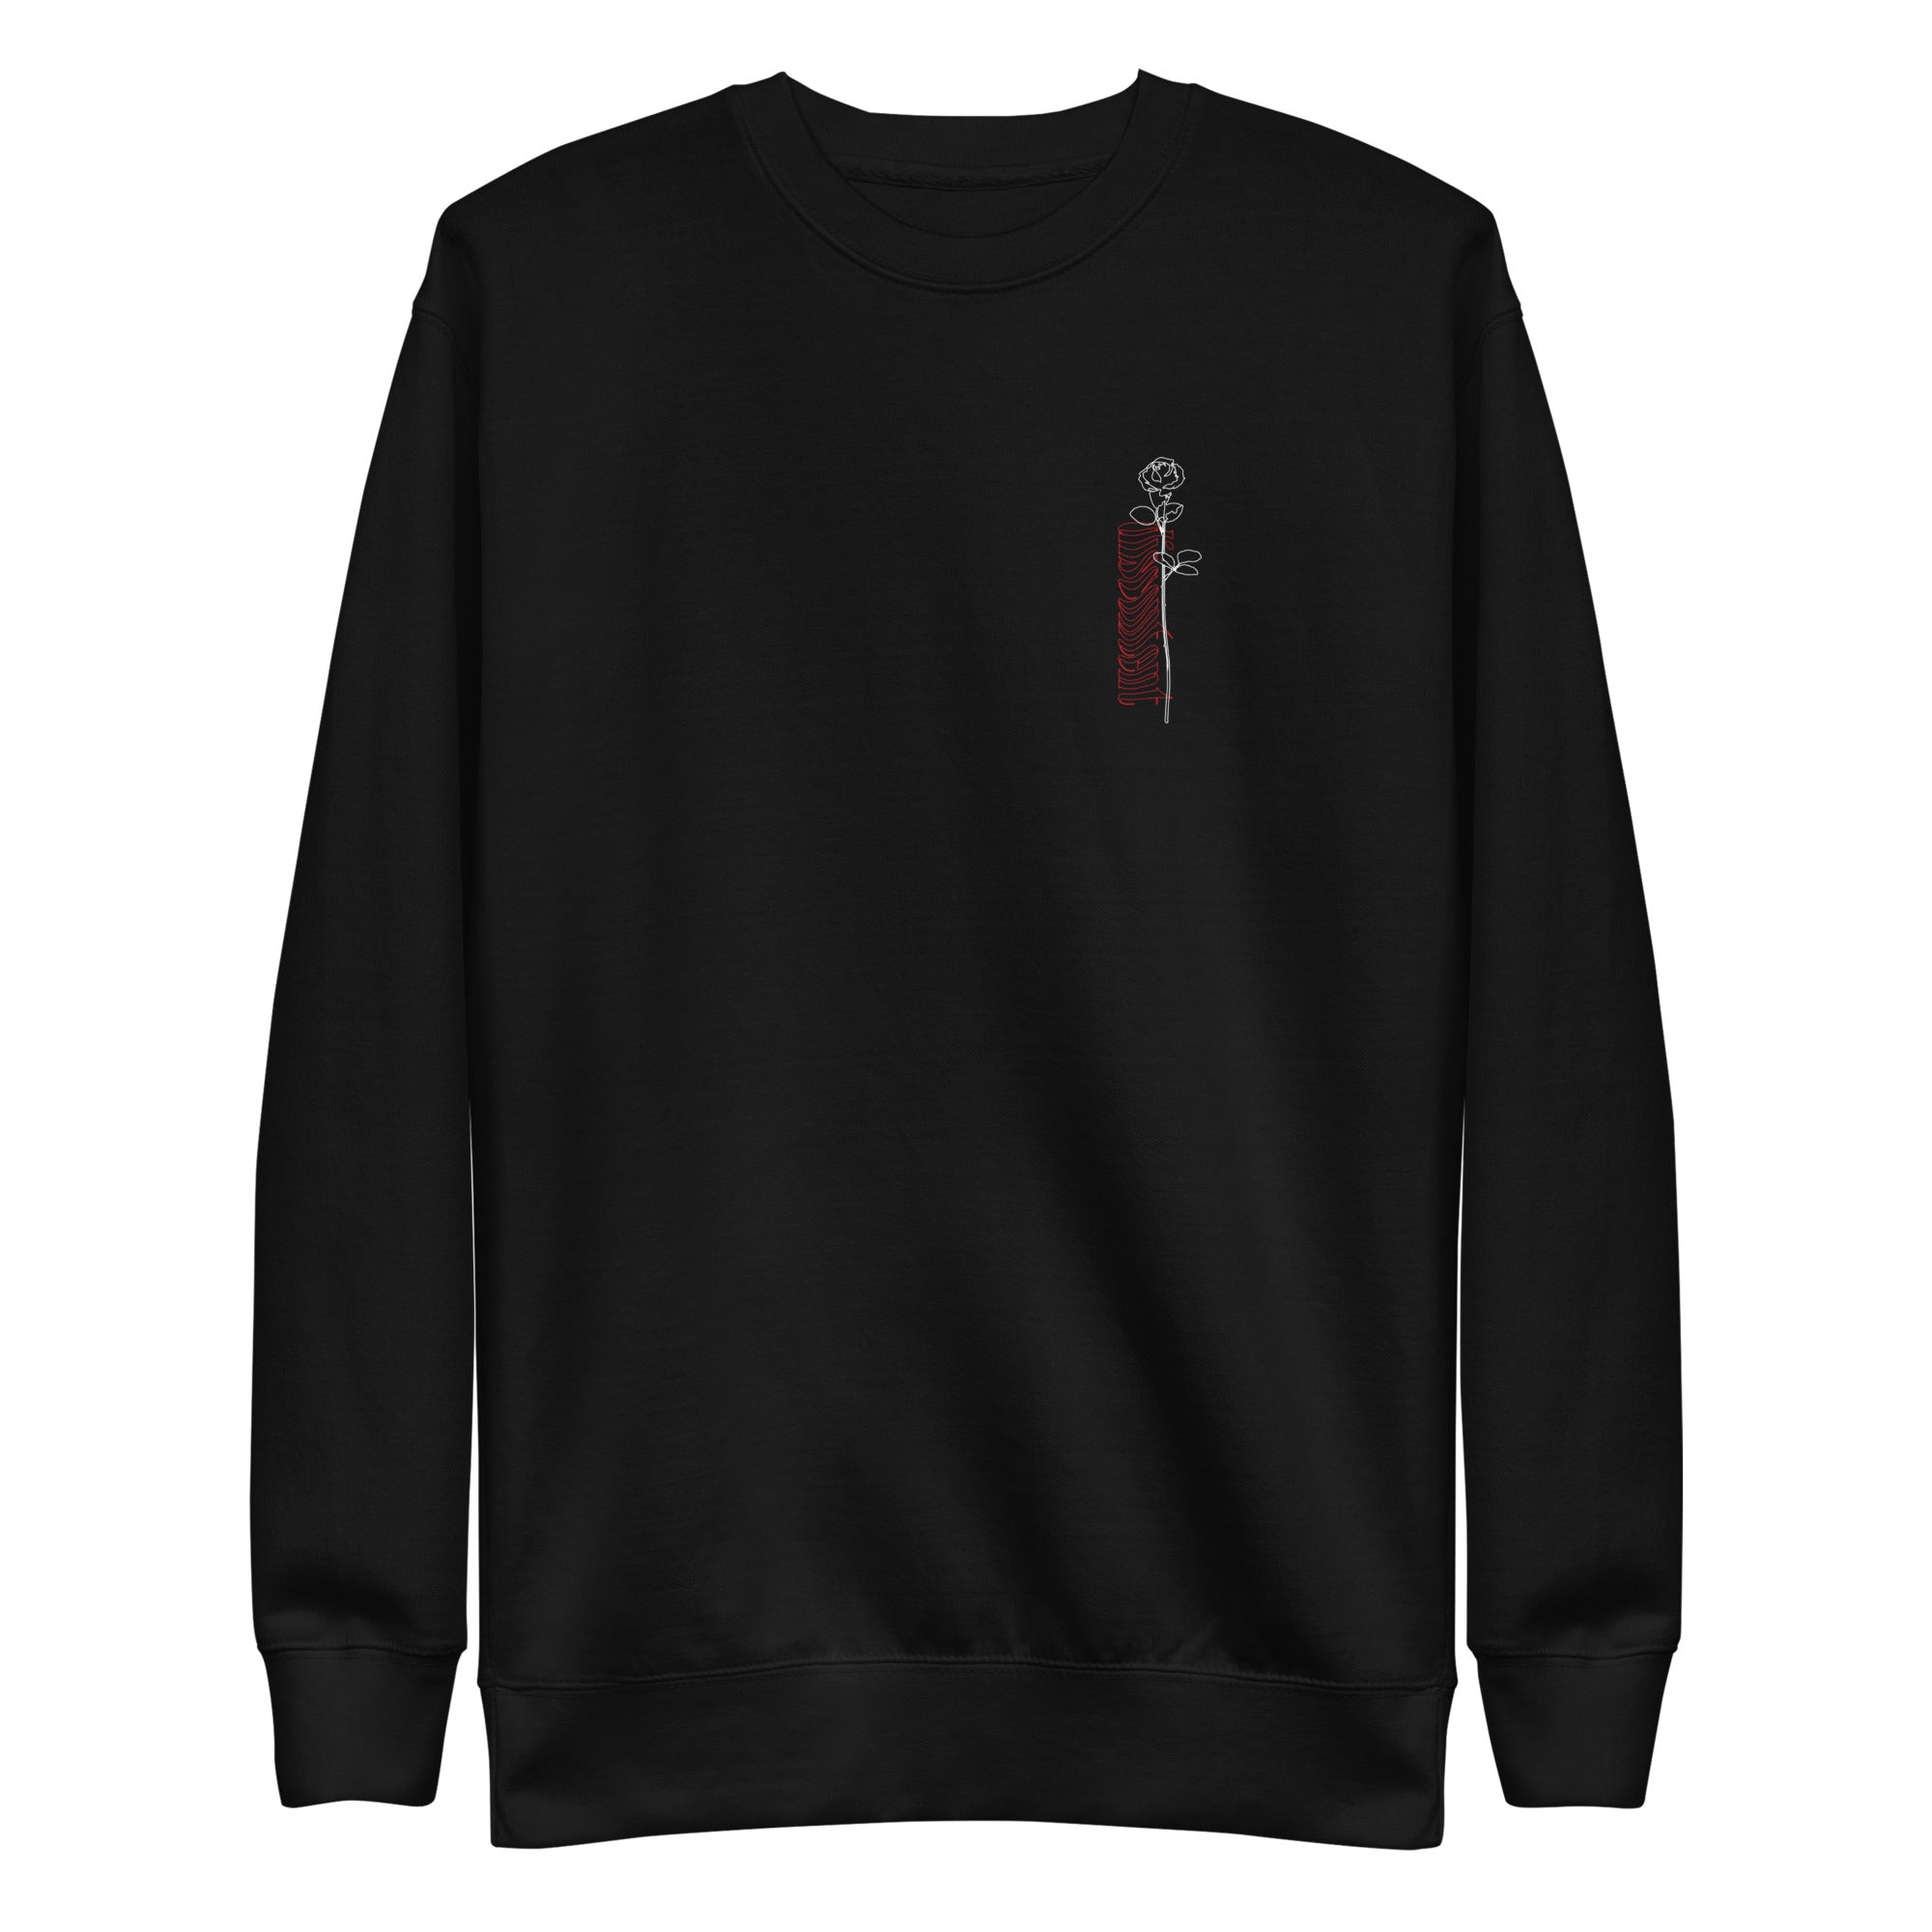 discontent - sketched • anime sweatshirt - Jackler - anime-inspired streetwear - anime clothing